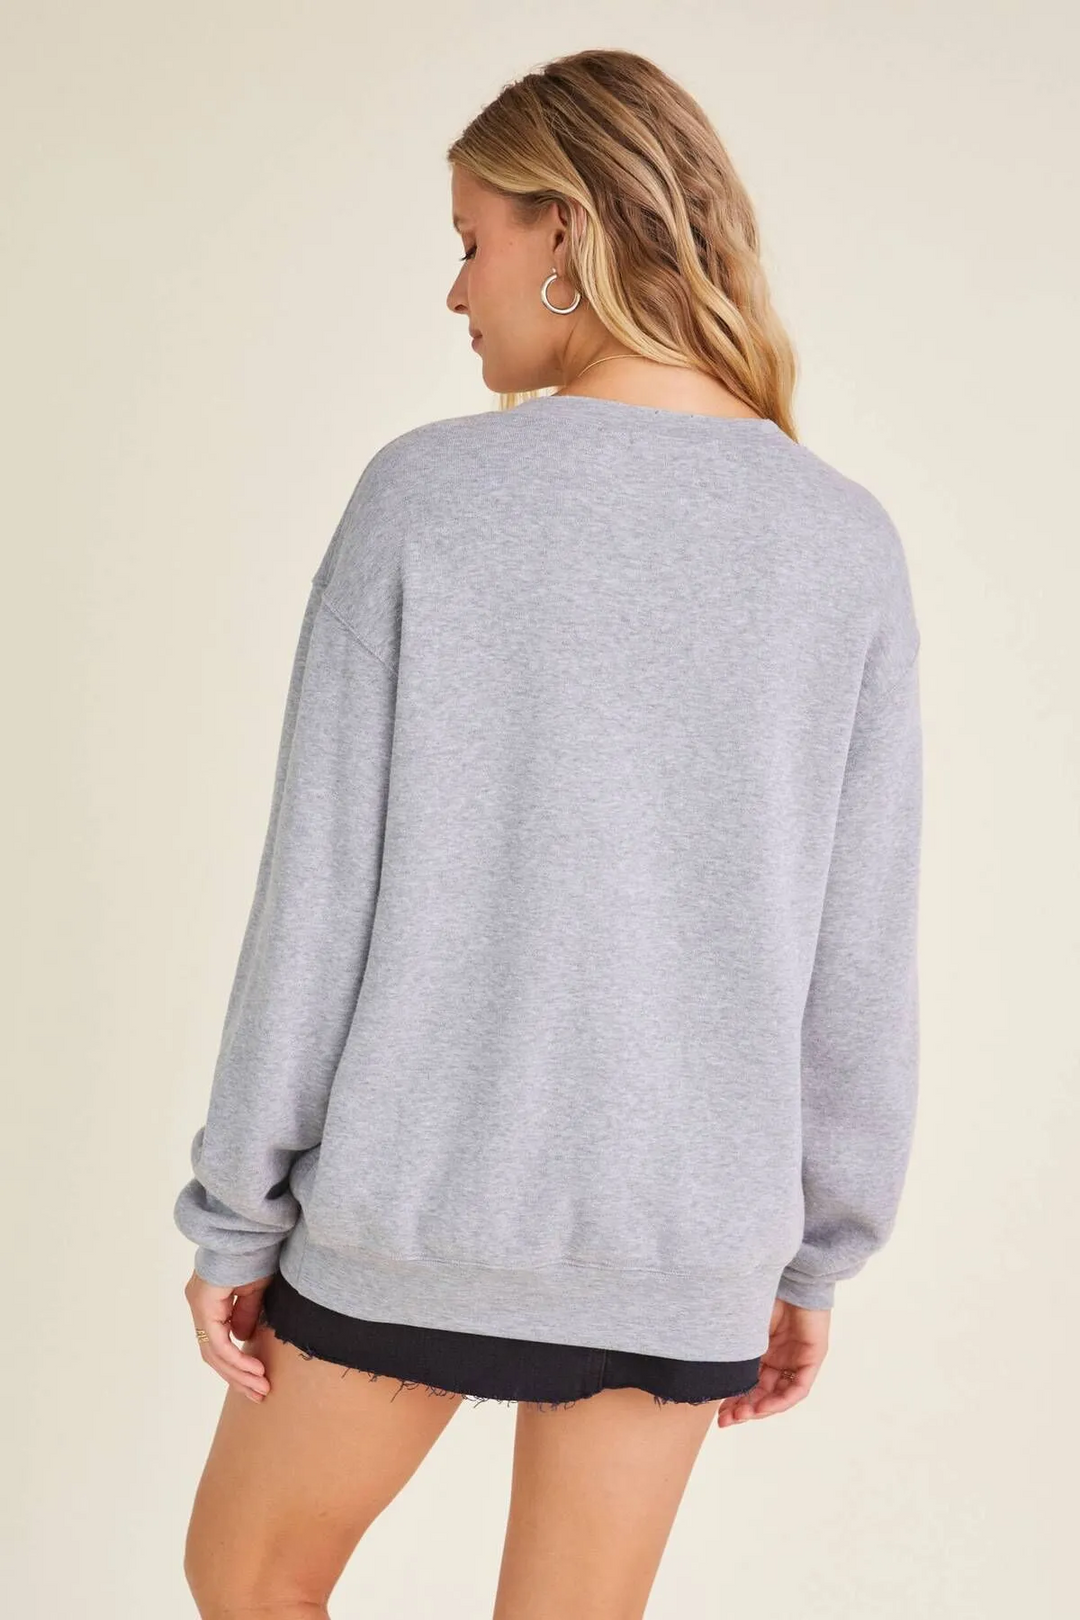 SYD DISTRESSED SWEATSHIRT - Kingfisher Road - Online Boutique